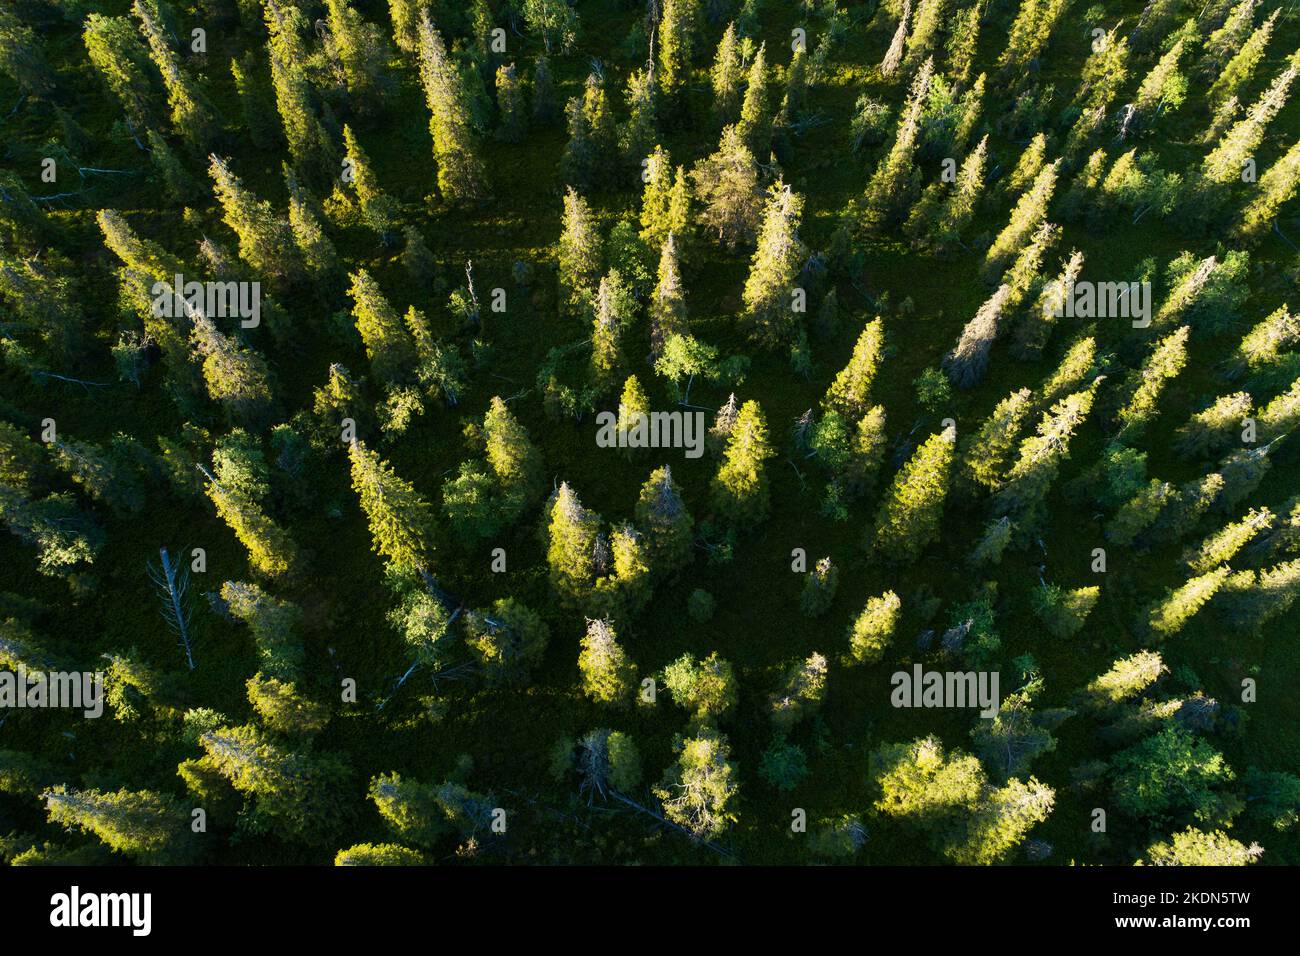 An aerial of an old-growth coniferous taiga forest in summery Riisitunturi National Park, Northern Finland Stock Photo